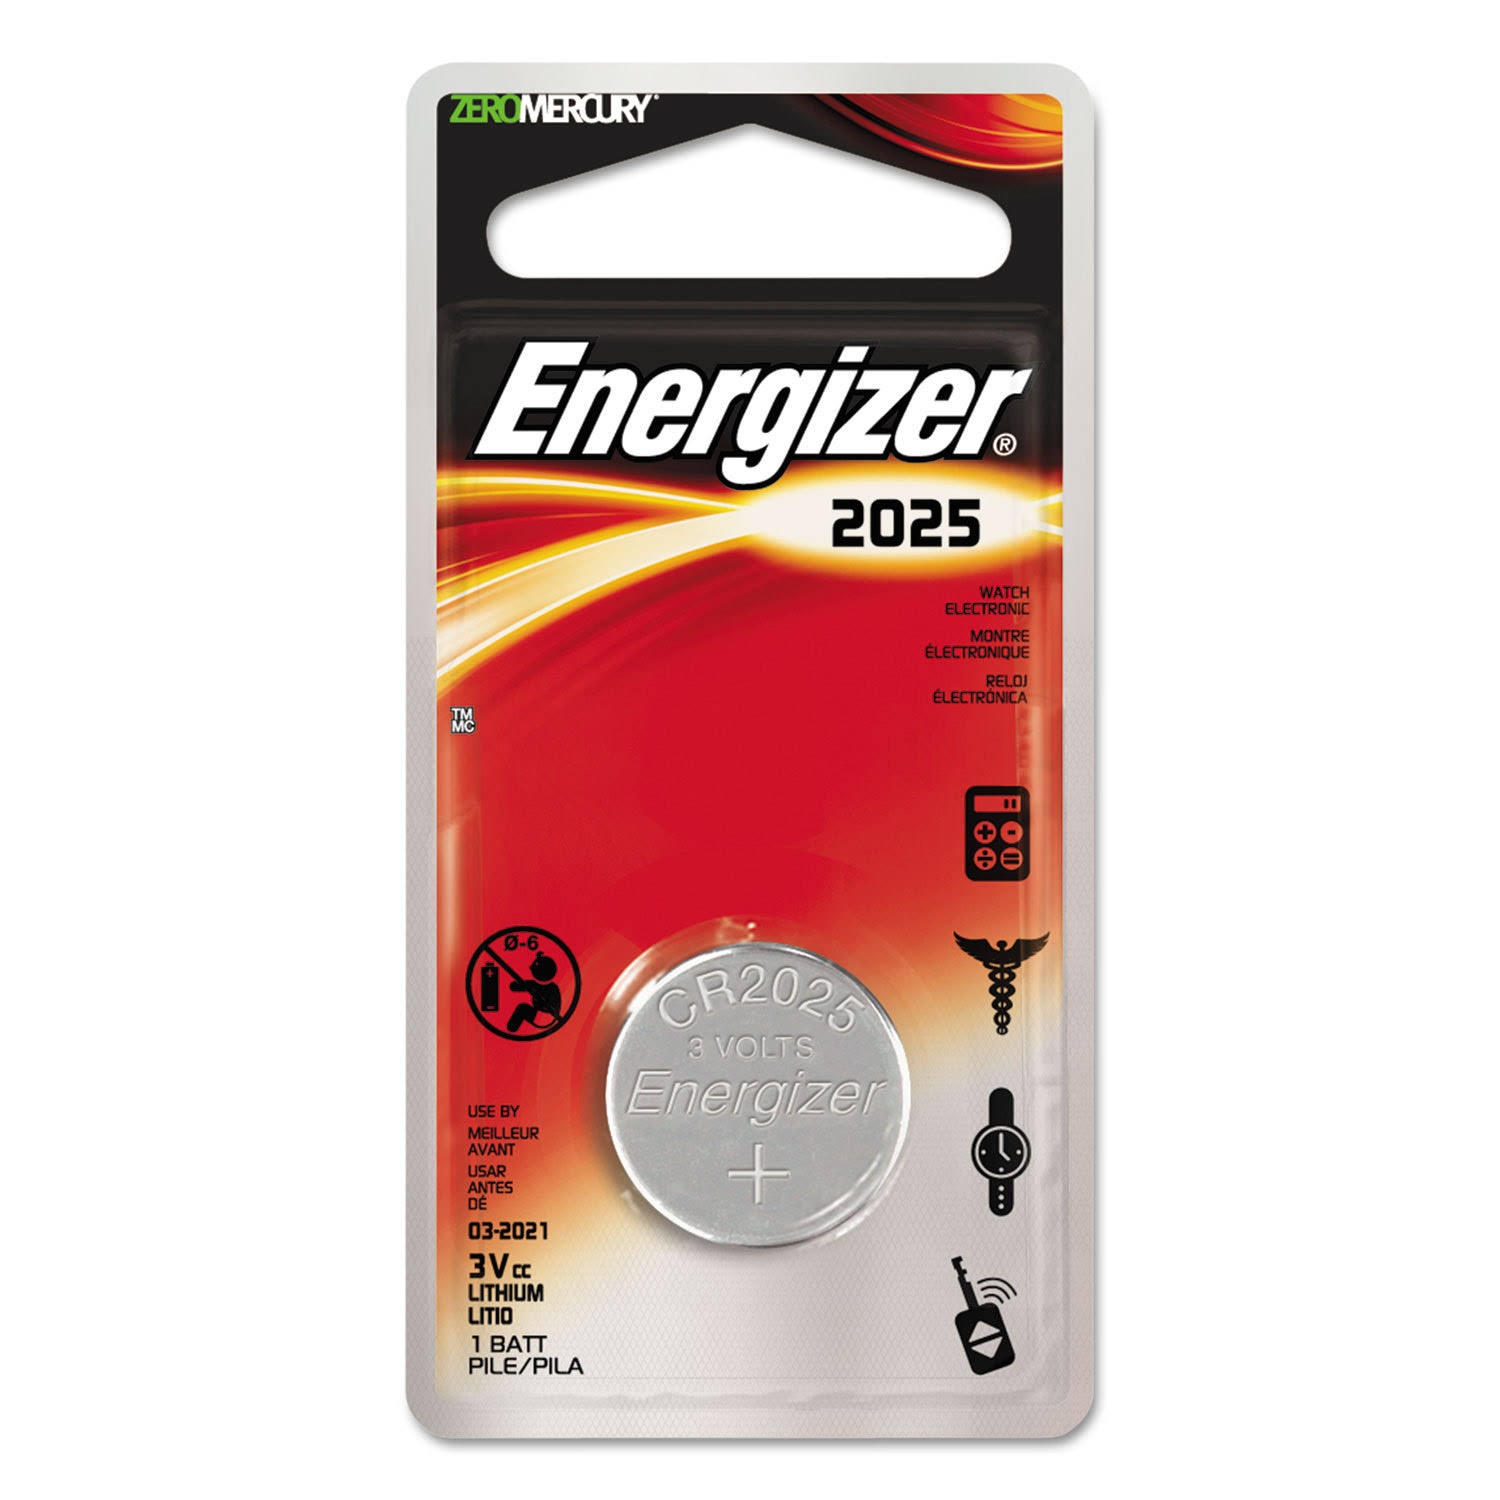 Energizer 2025 Lithium Button Cell Batteries - 3V